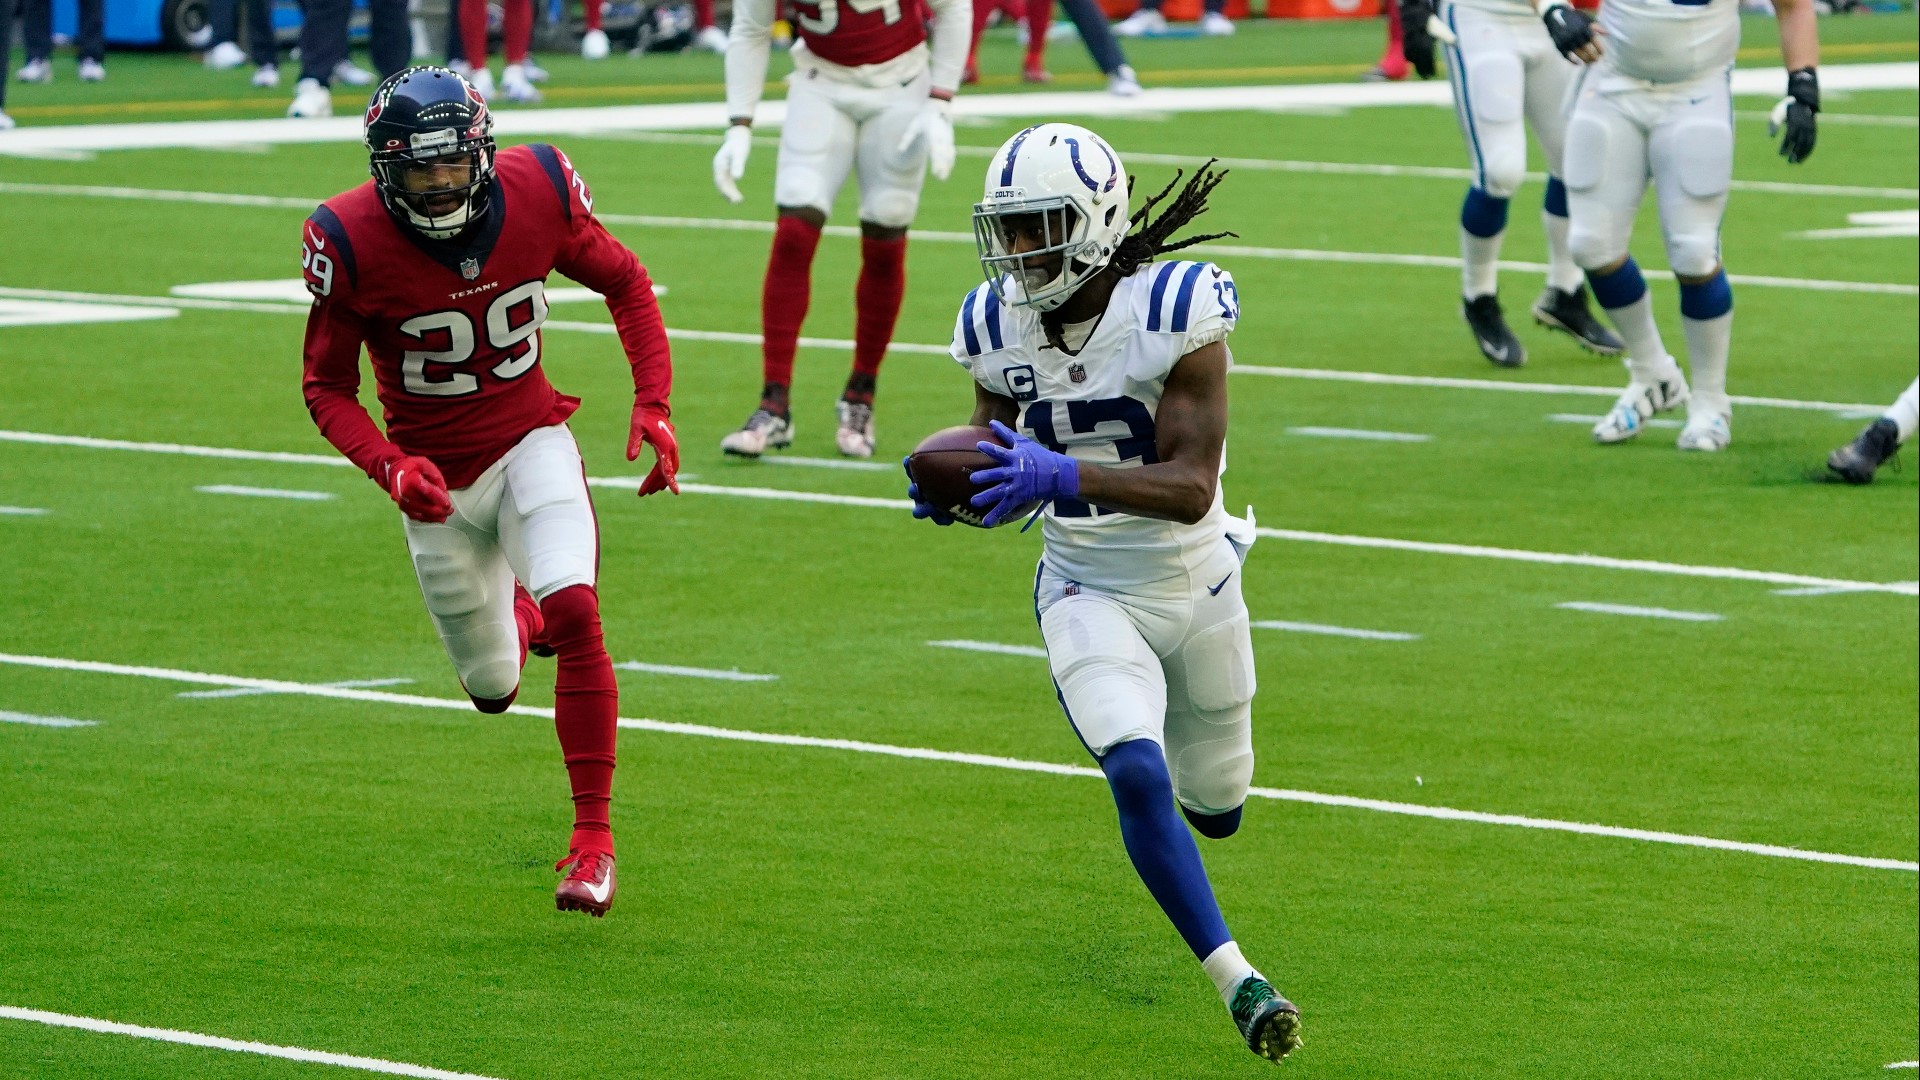 Colts coach Frank Reich was adamant that the team was doing everything it could to help T.Y. Hilton heal.